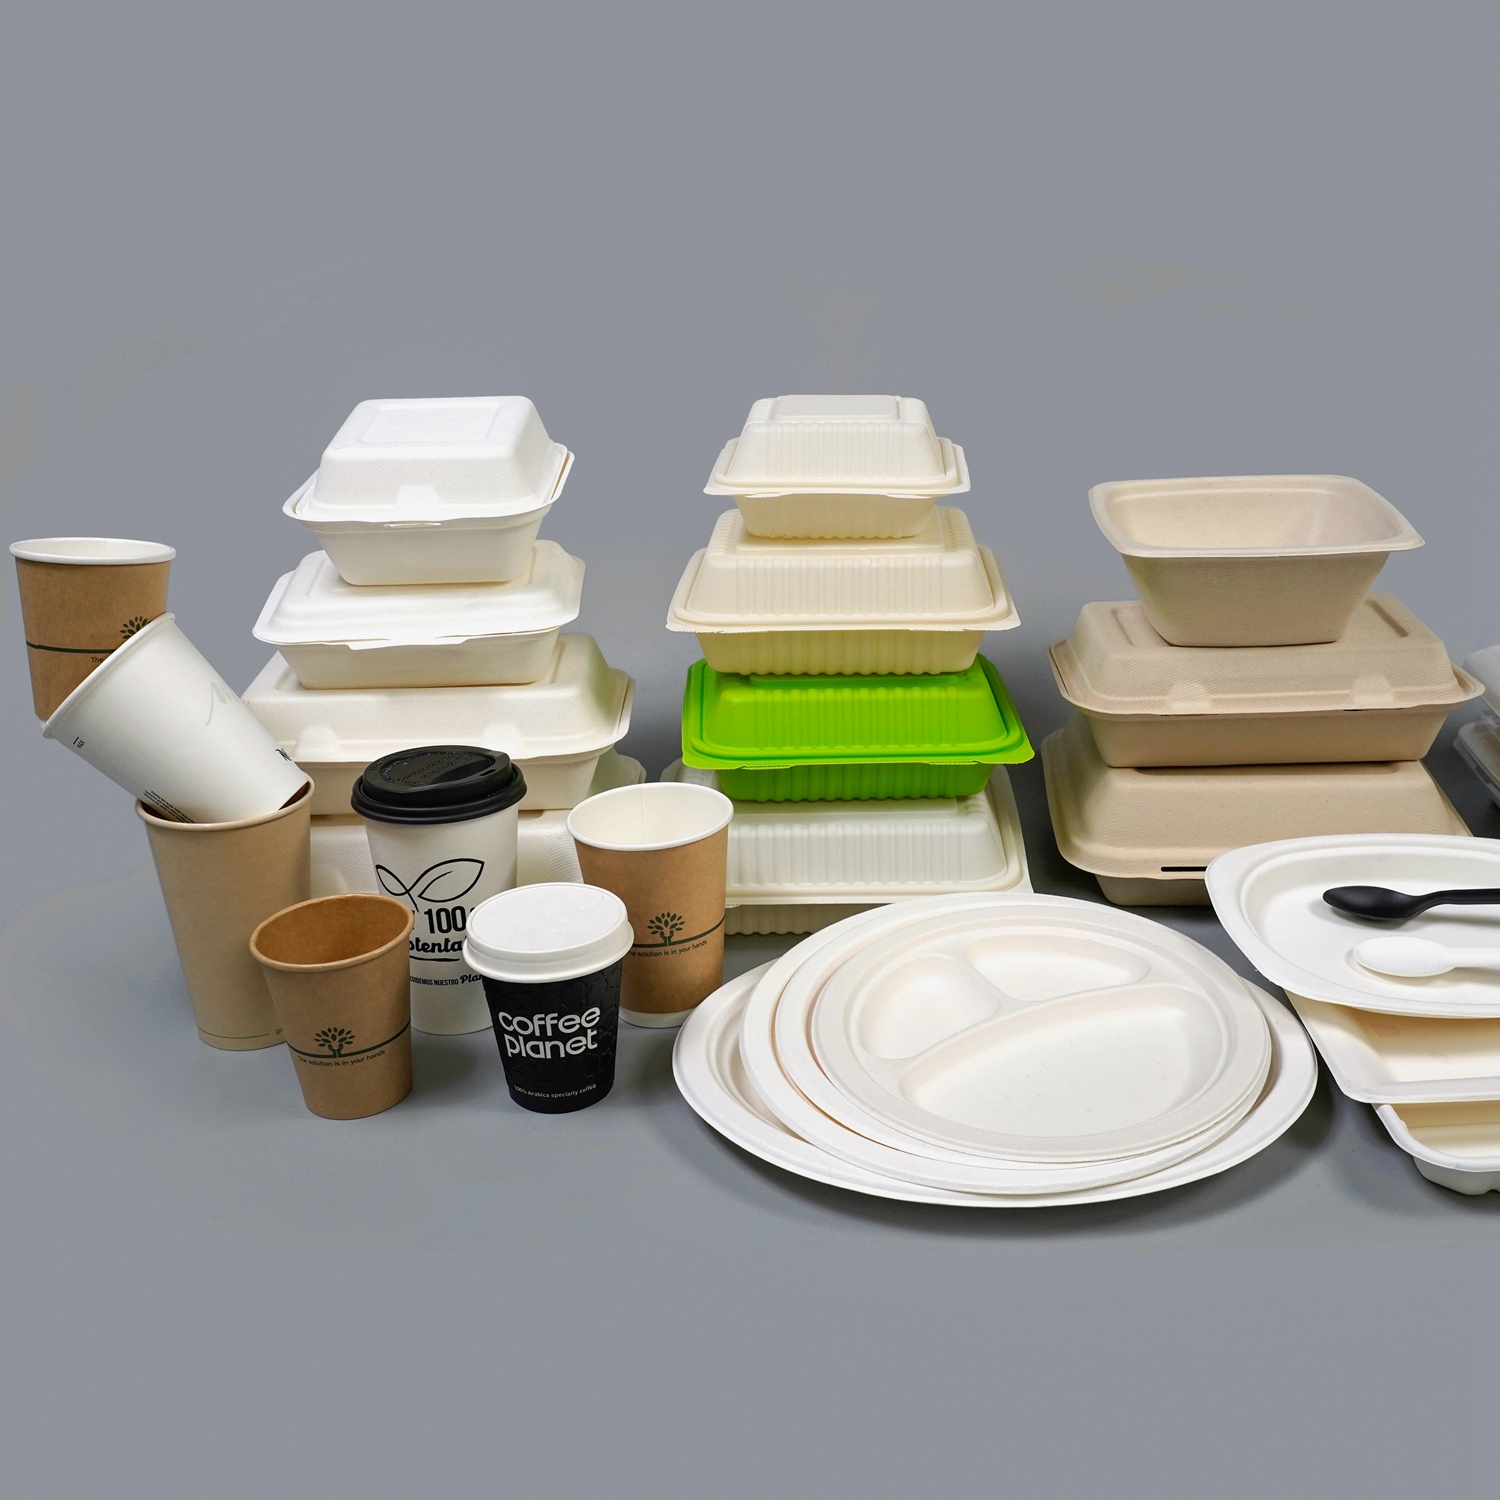 biodegradable and eco-friendly packaging